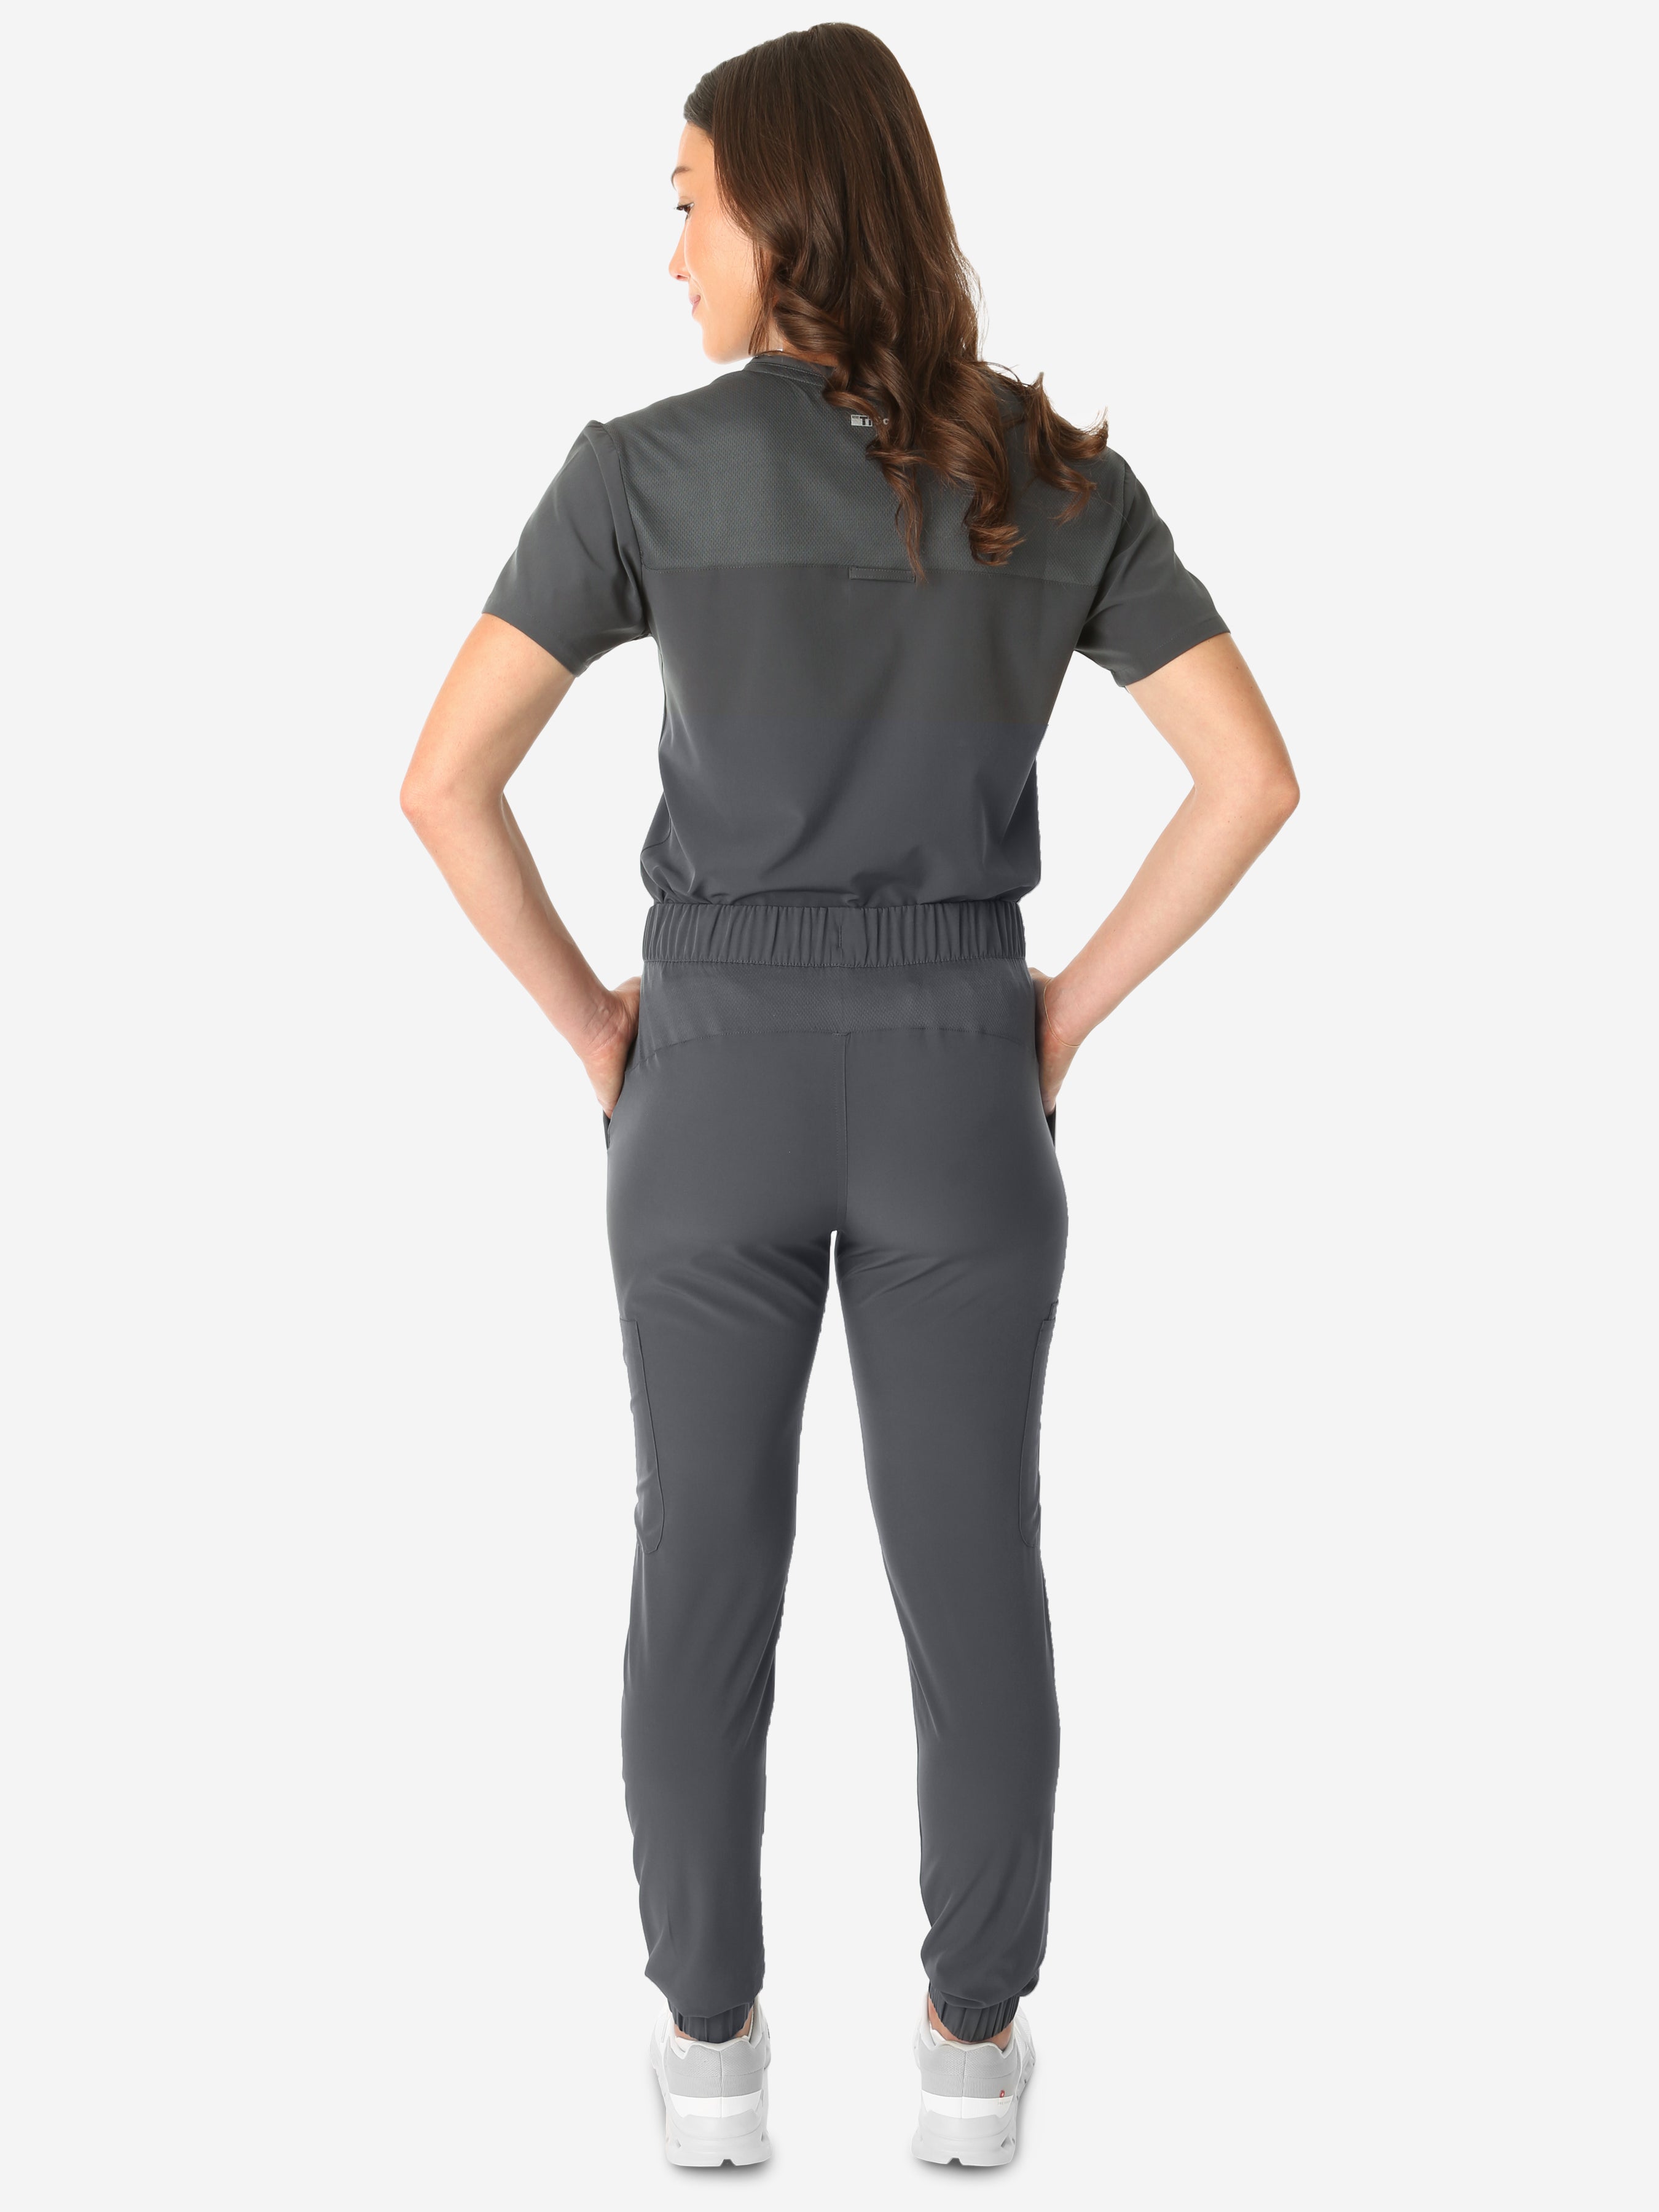 TiScrubs Charcoal Gray Women&#39;s Stretch Perfect Jogger Pants and One-Pocket Tuckable Top Back View Full Body